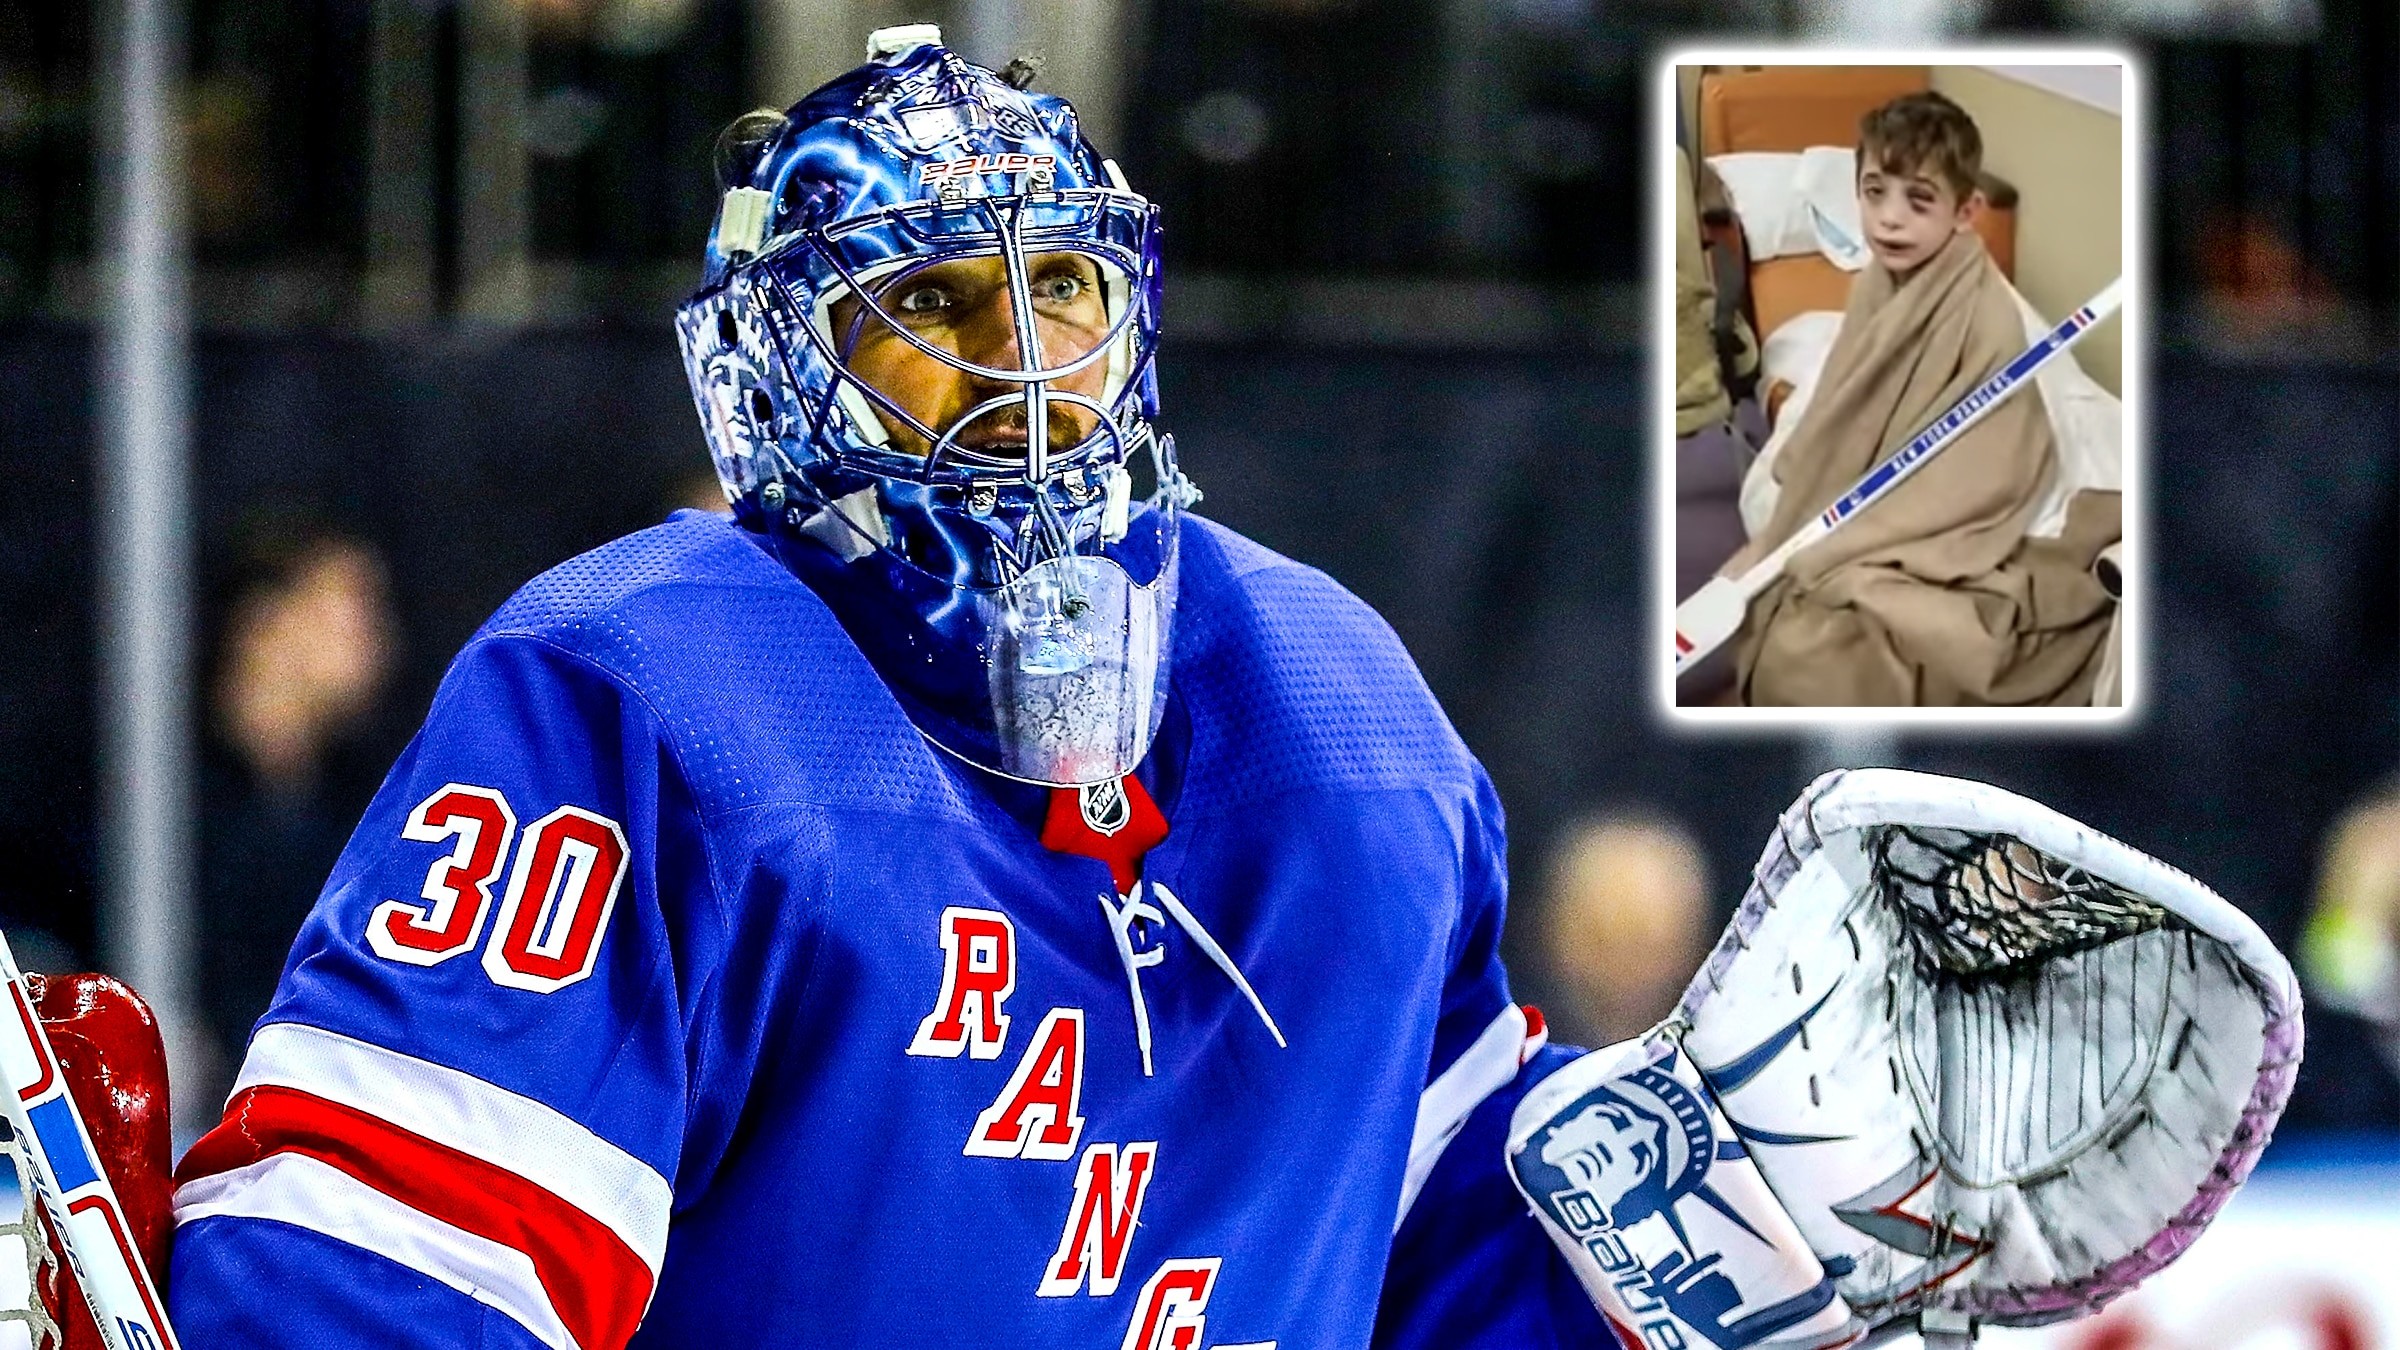 Rangers fans can't bear the sight of this new Henrik Lundqvist